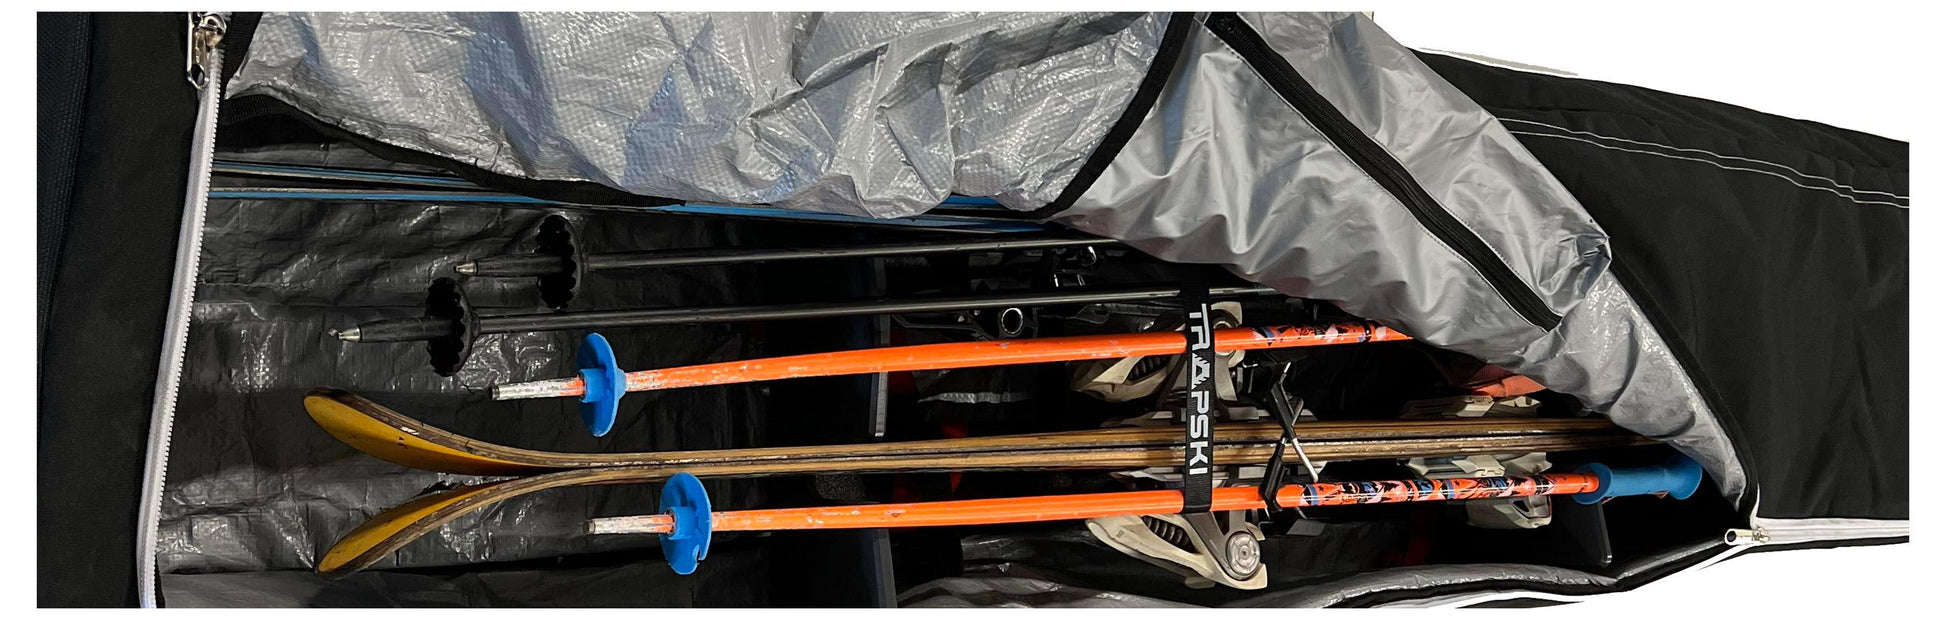 TRAPSKI Traveler Rack for Dual/Double Ski Travel Bags | Rack Insert is for Skis Only | High Quality Marine Grade HDPE Plastic | Premium Strap Included | 3 Year Warranty | Made in the USA - TRAPSKI, LLC